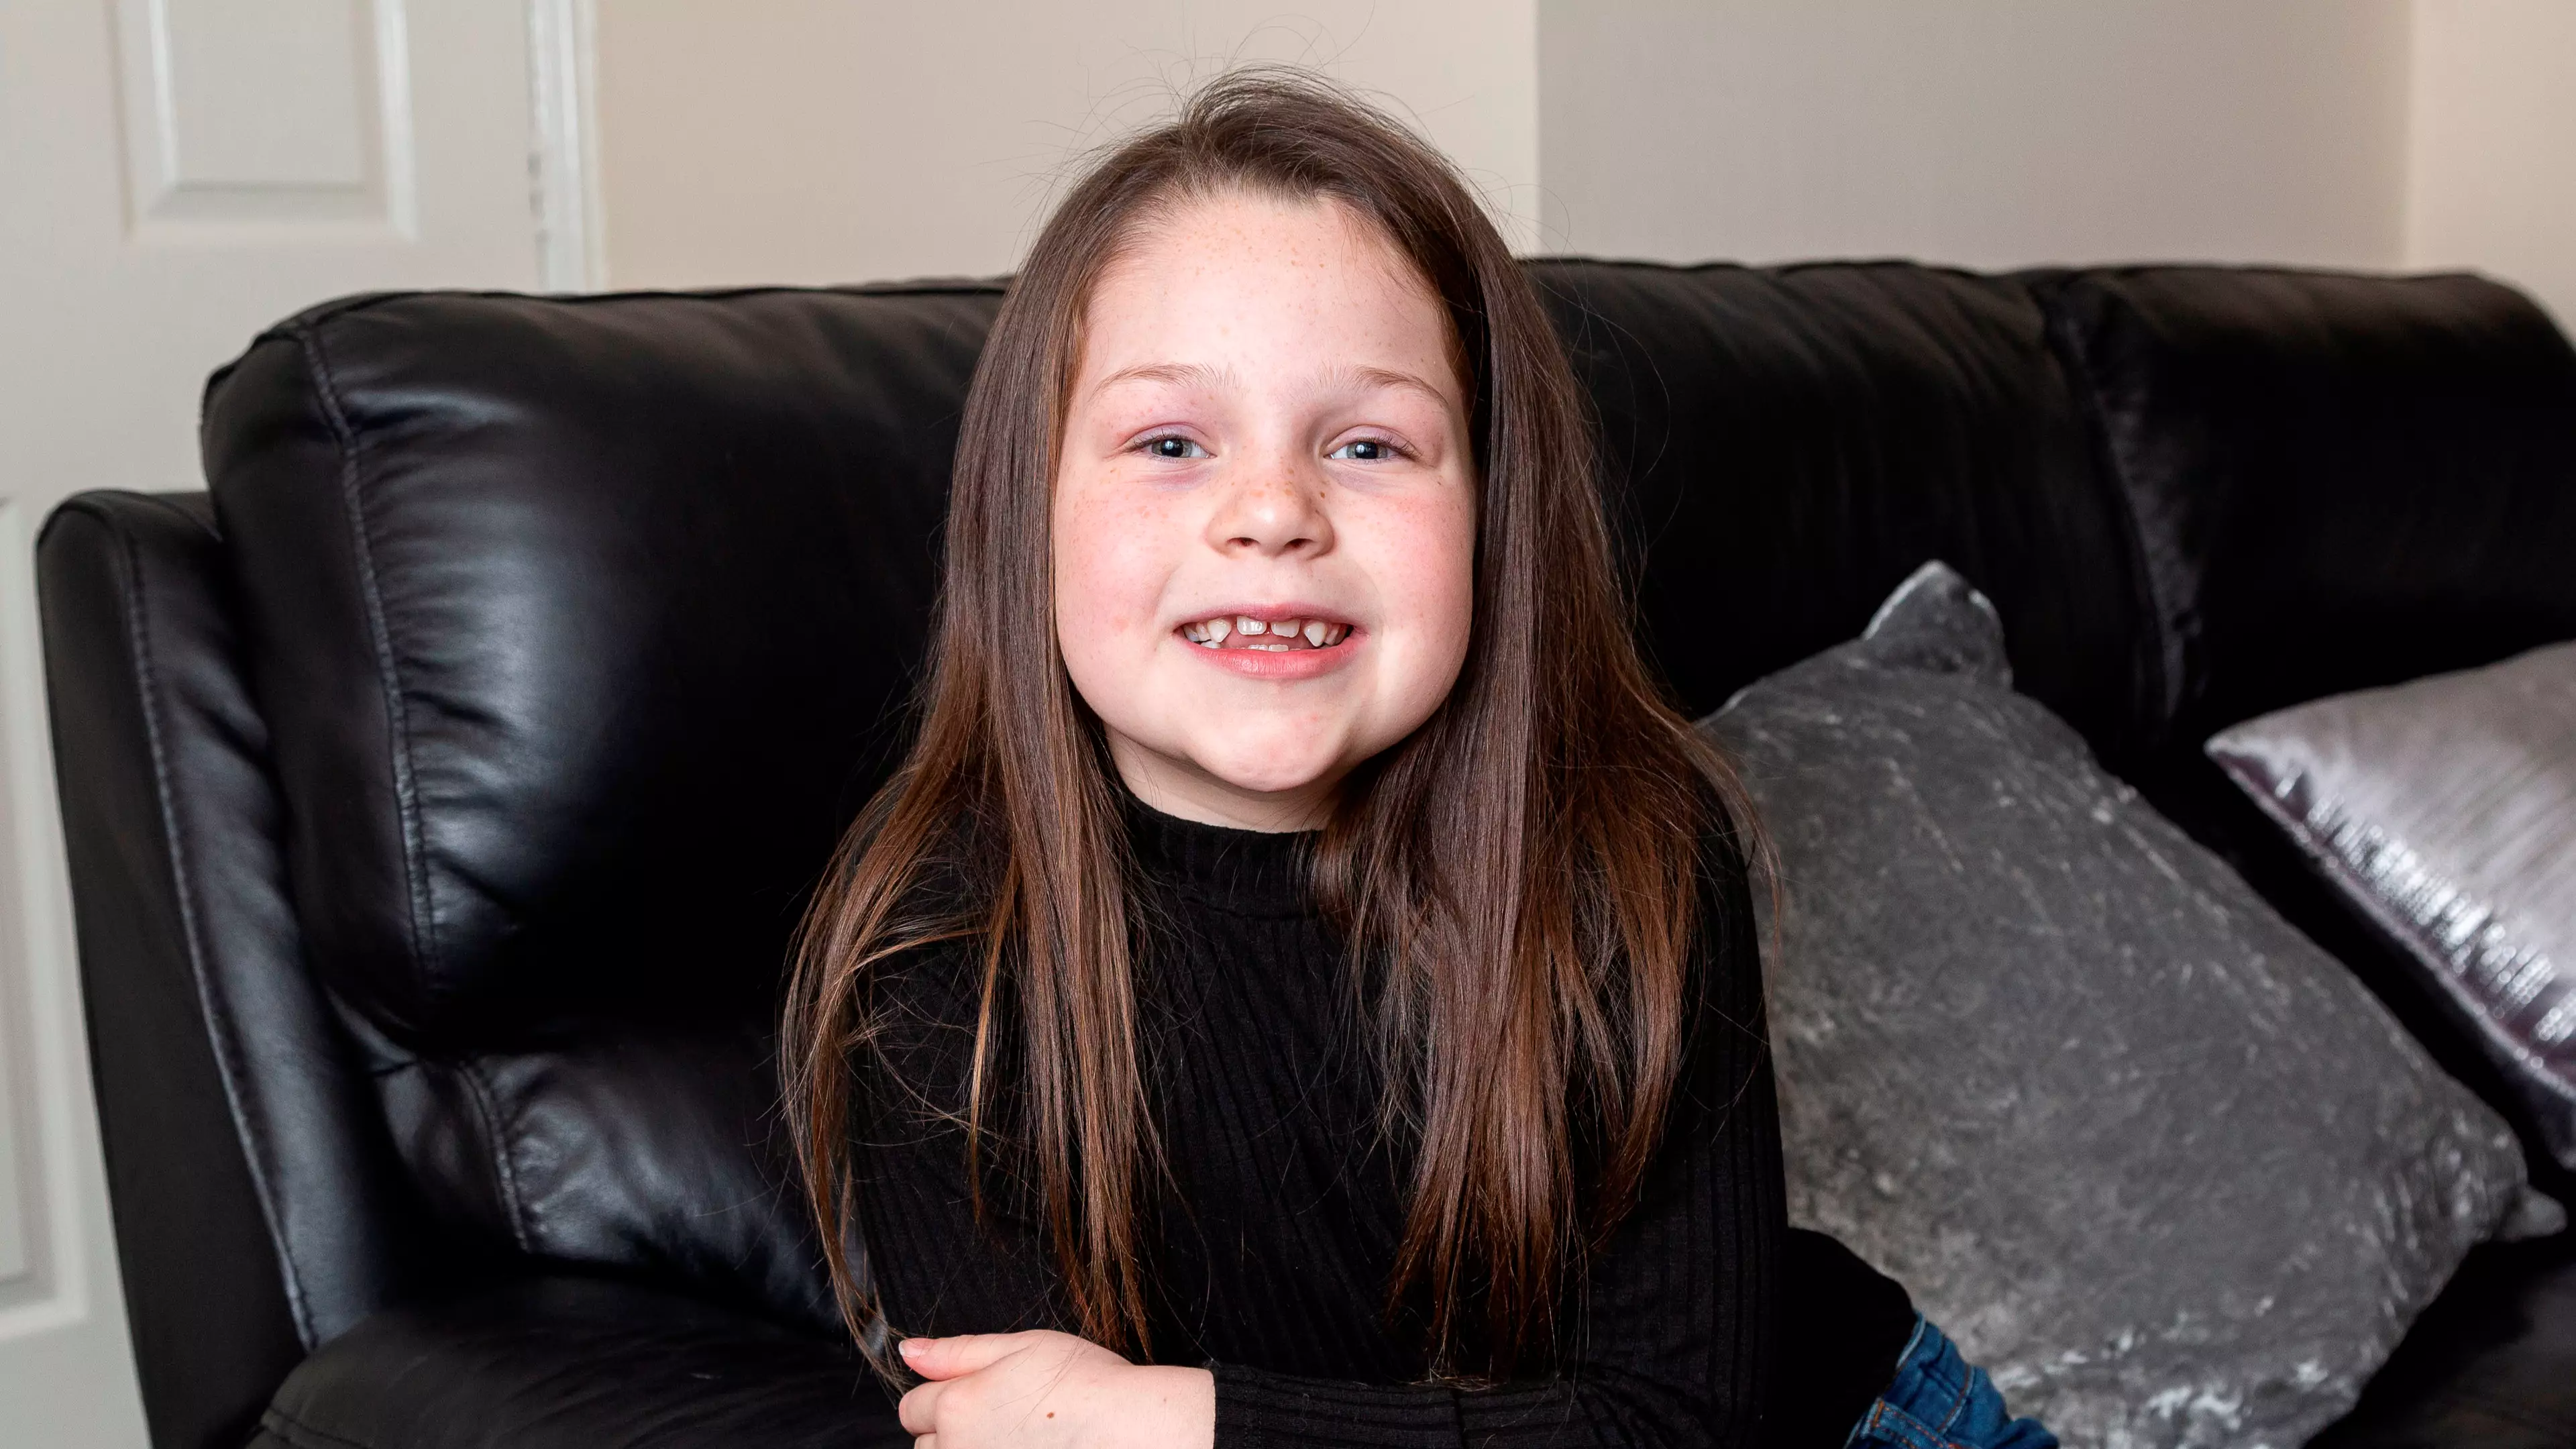 Seven Year Old Girl Saves Mum's Life After Watching YouTube Videos